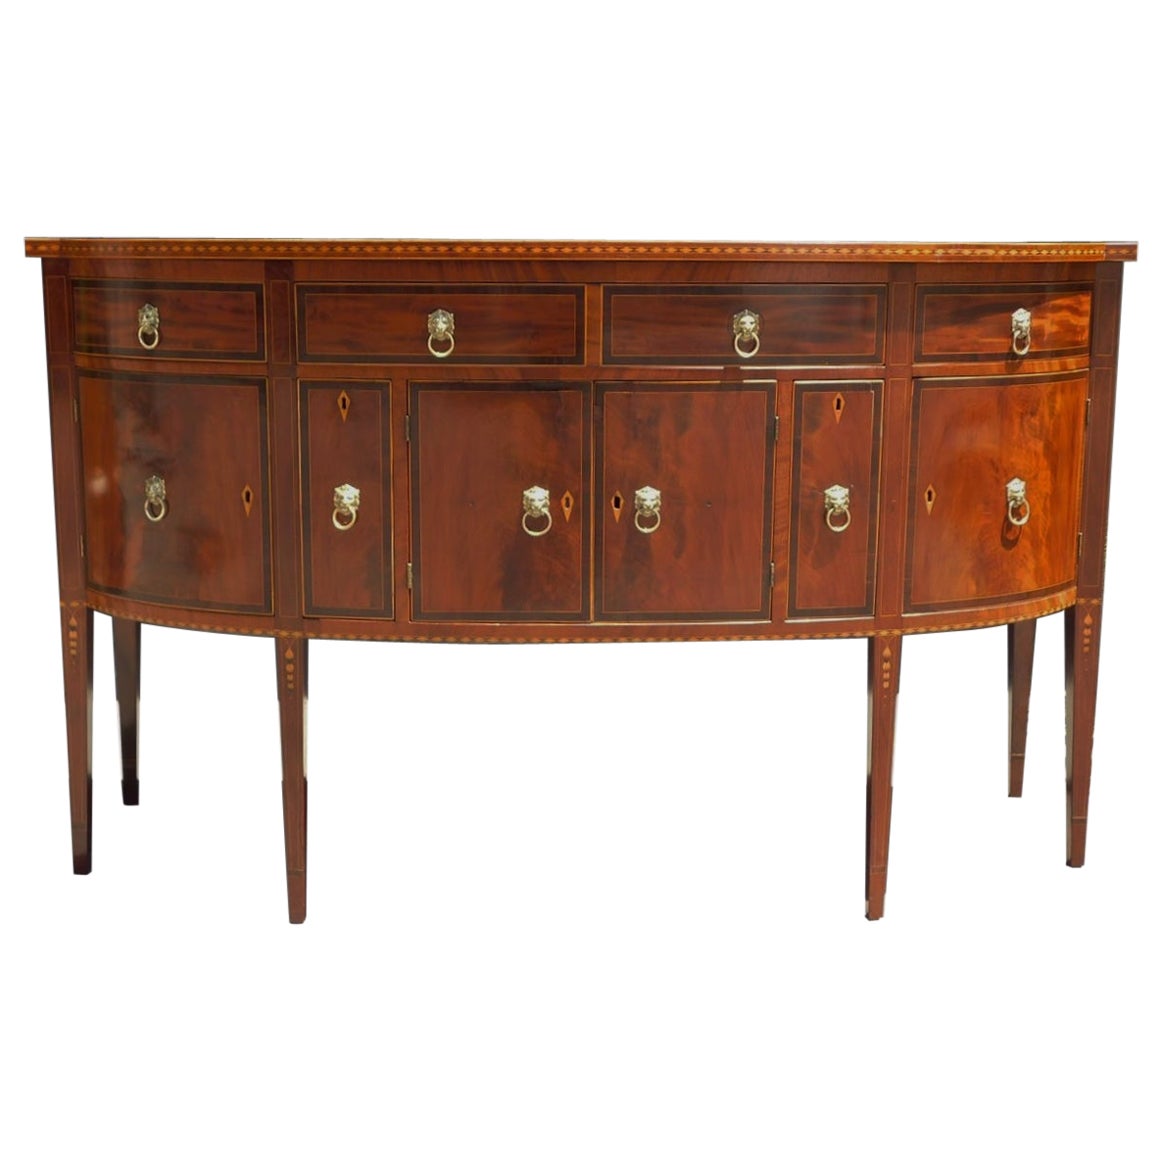 American Hepplewhite Mahogany Bow Front Satinwood Inlaid Sideboard, Circa 1780 For Sale